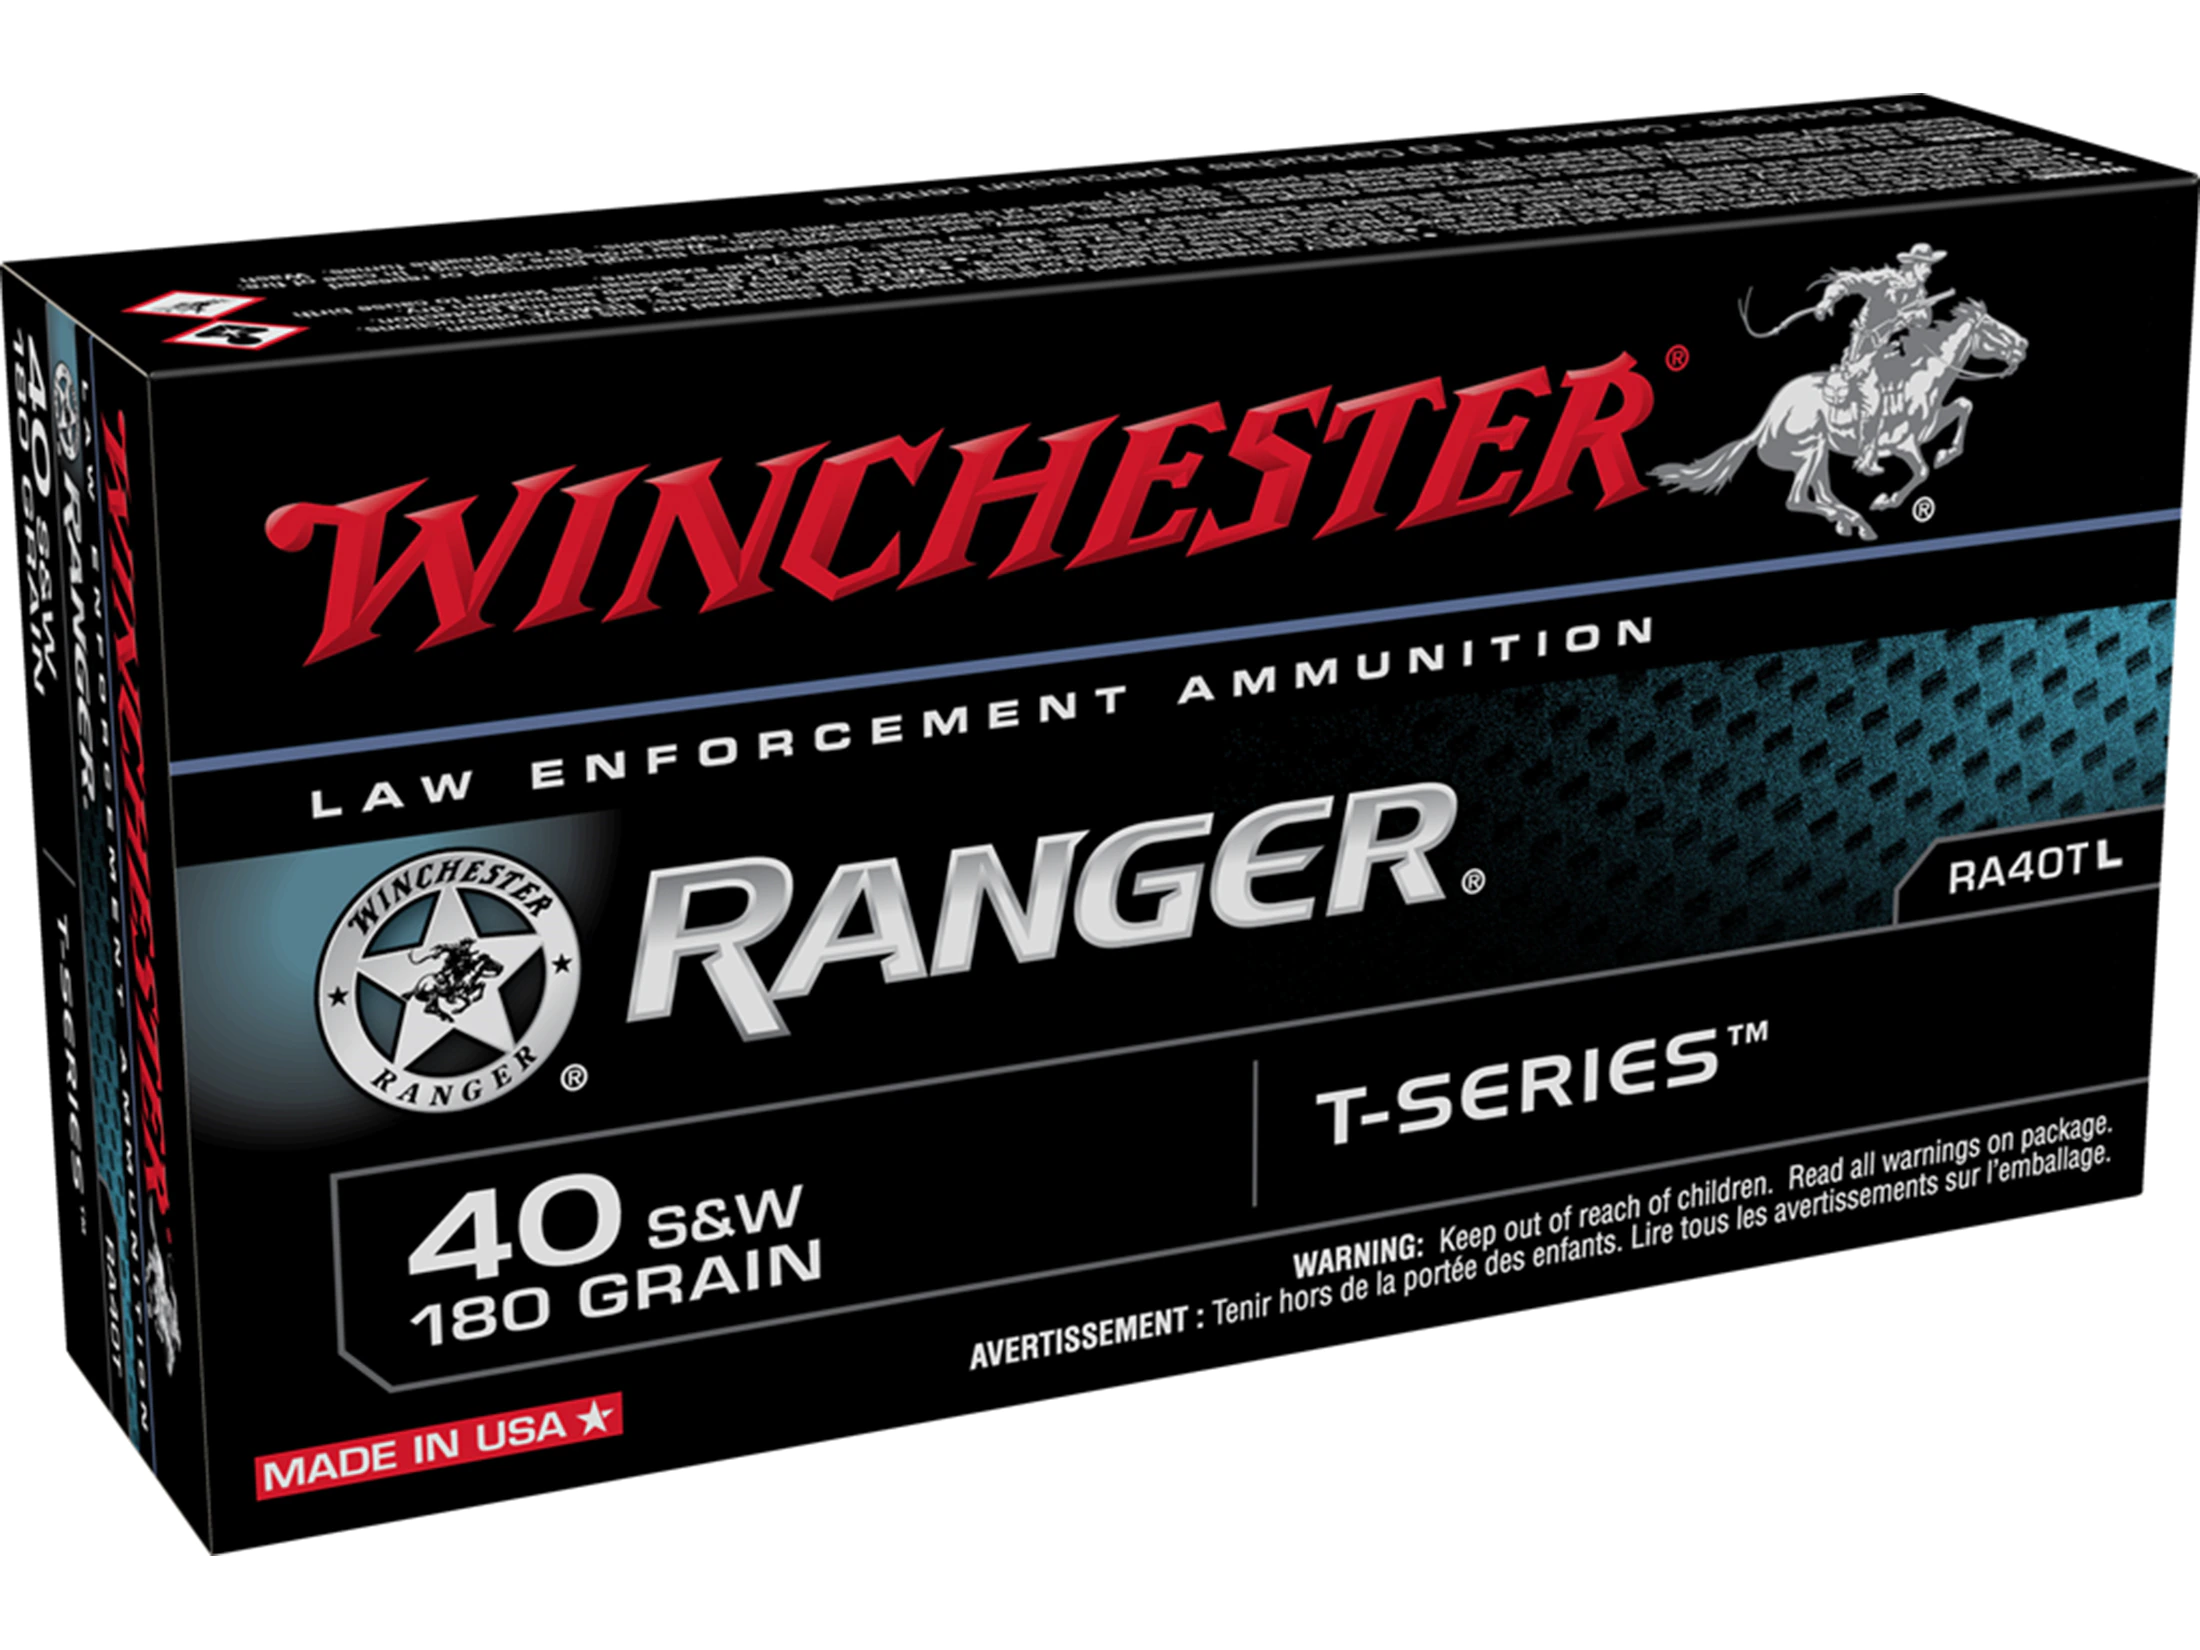 Image of Winchester Ranger Ammunition 40 S&W 180 Grain T-Series Jacketed Hollow Point Box of 50